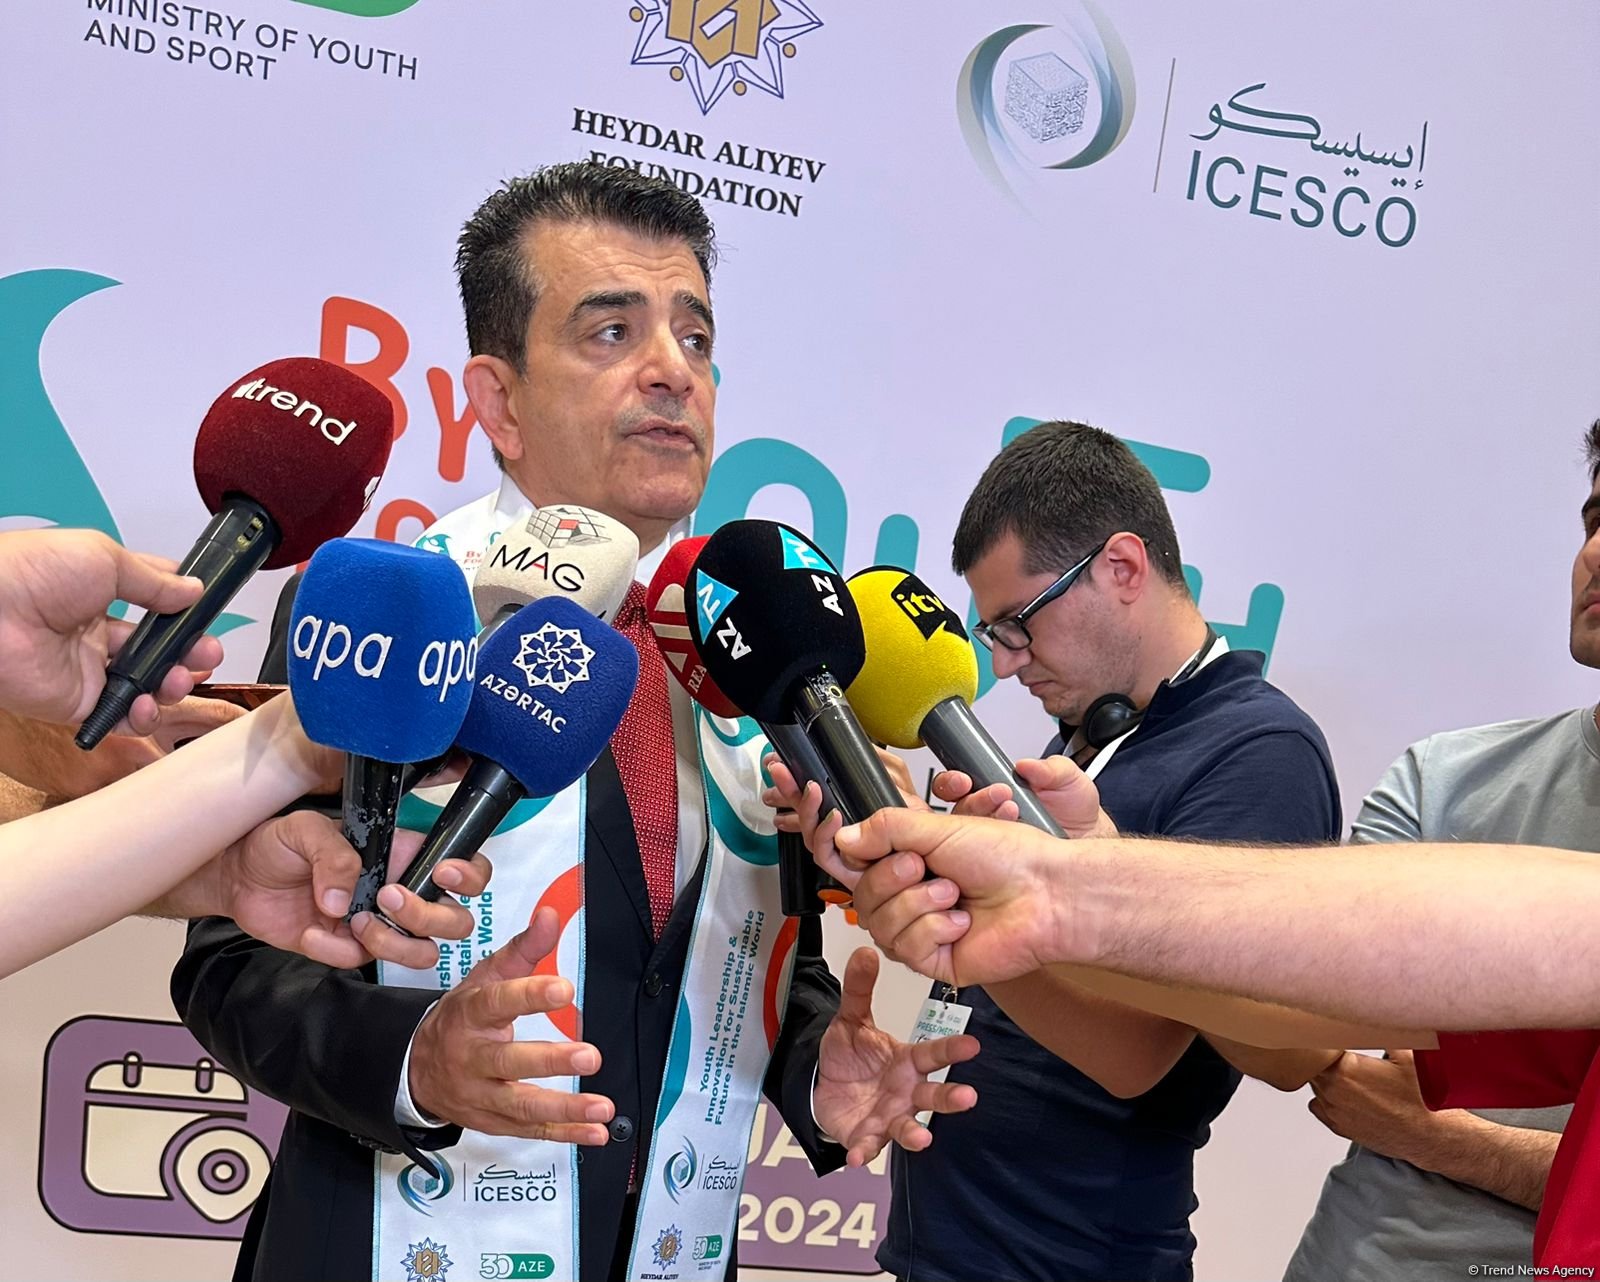 Int'l Forum in Azerbaijan's Shusha to shape our future - ICESCO Director General